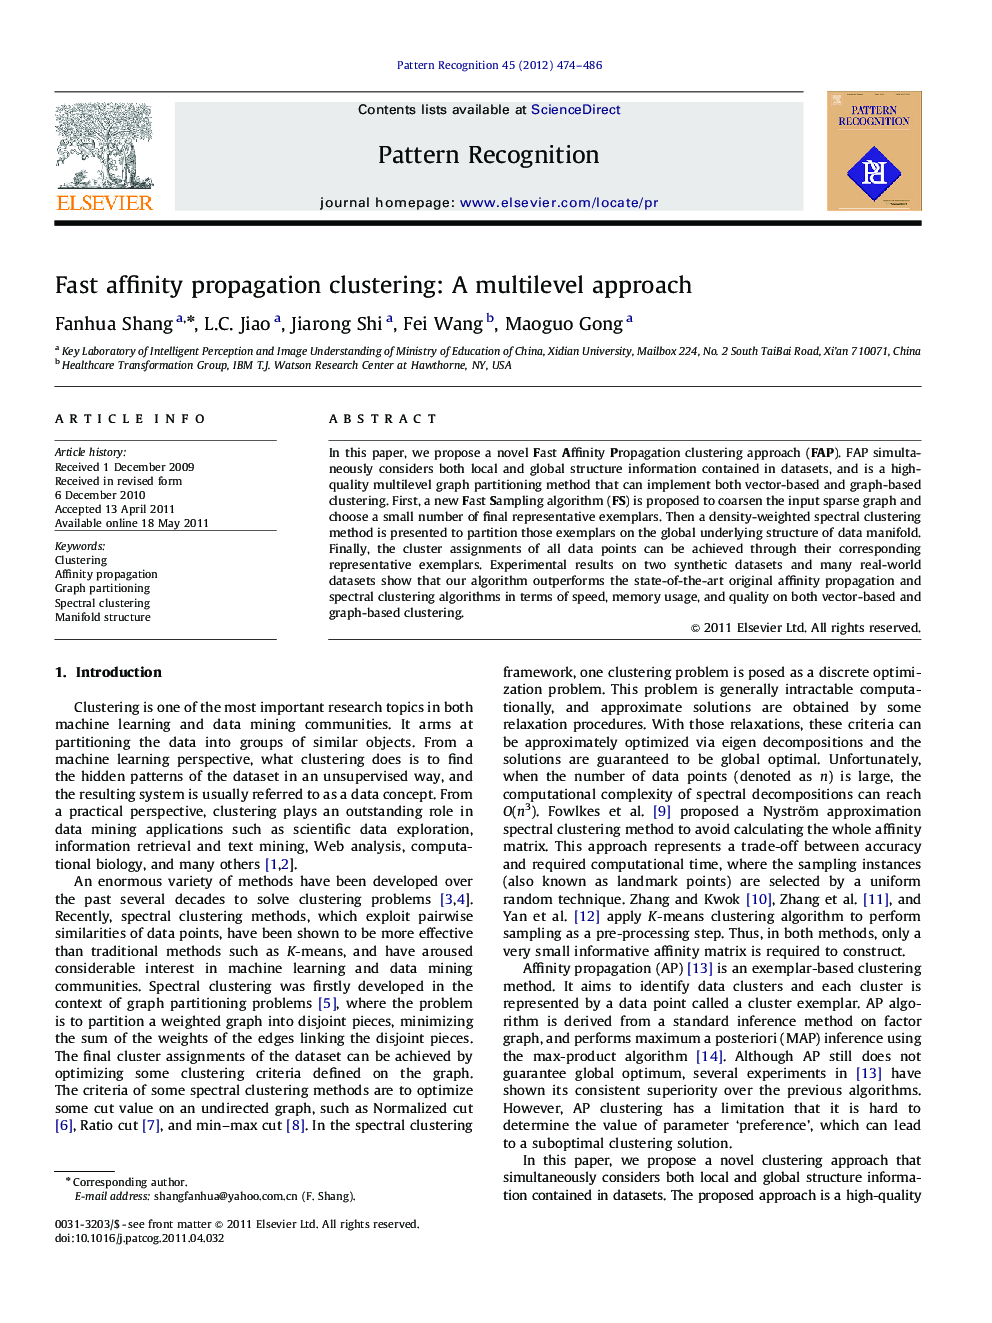 Fast affinity propagation clustering: A multilevel approach